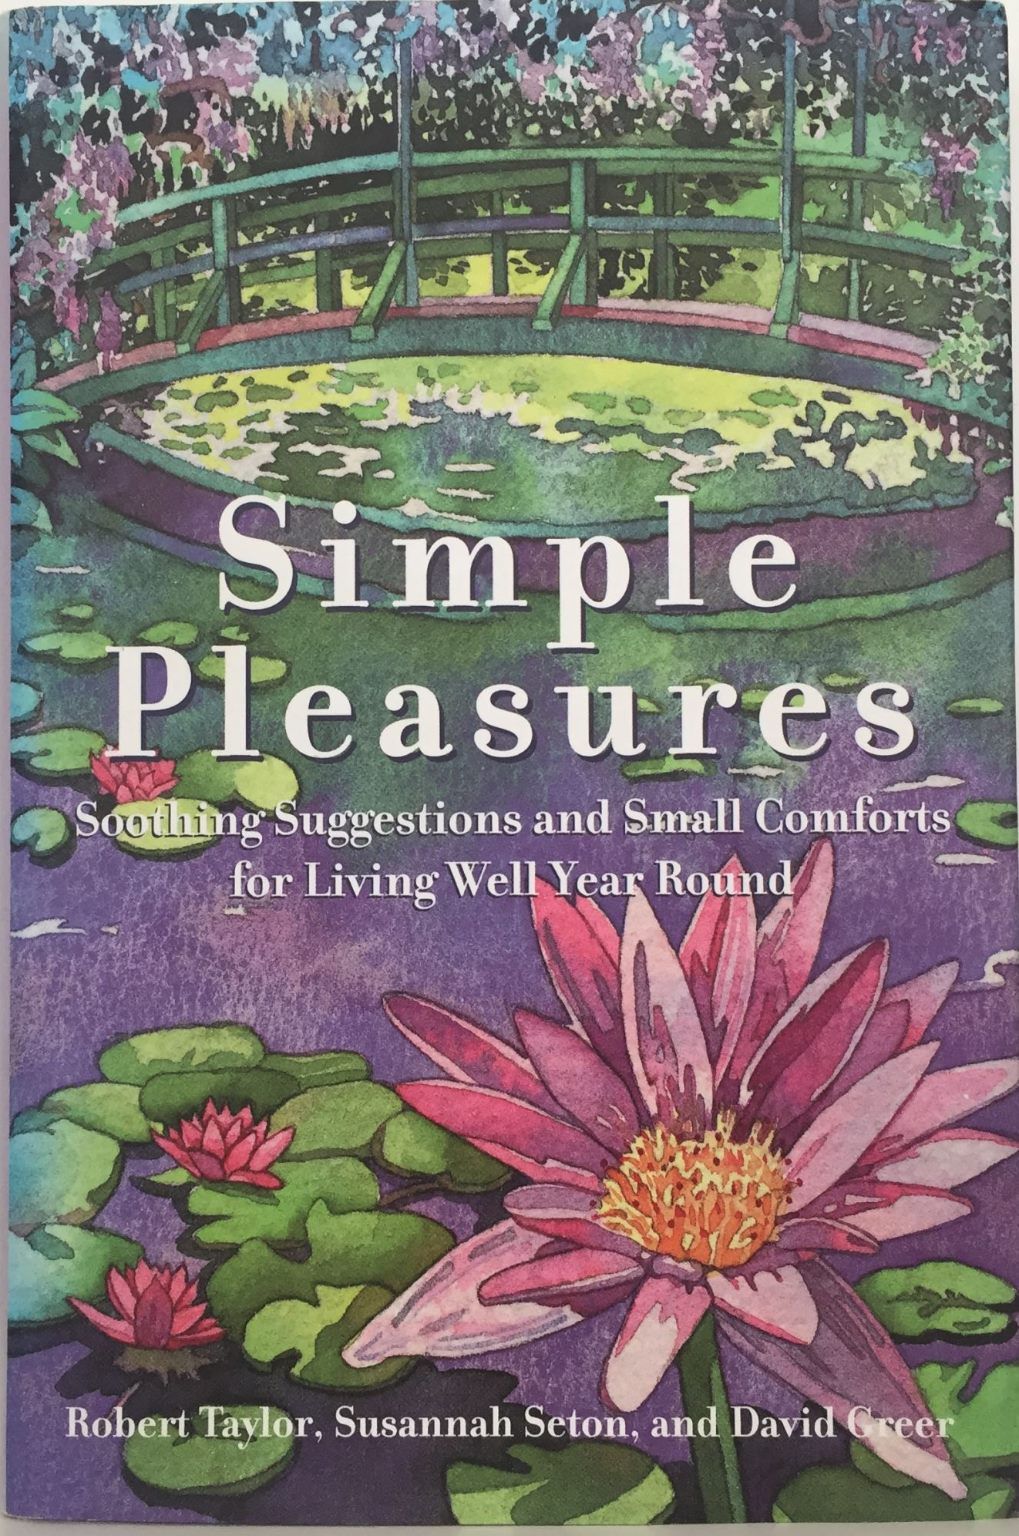 SIMPLE PLEASURES: Soothing Suggestions & Small Comforts for Living Well Year Round